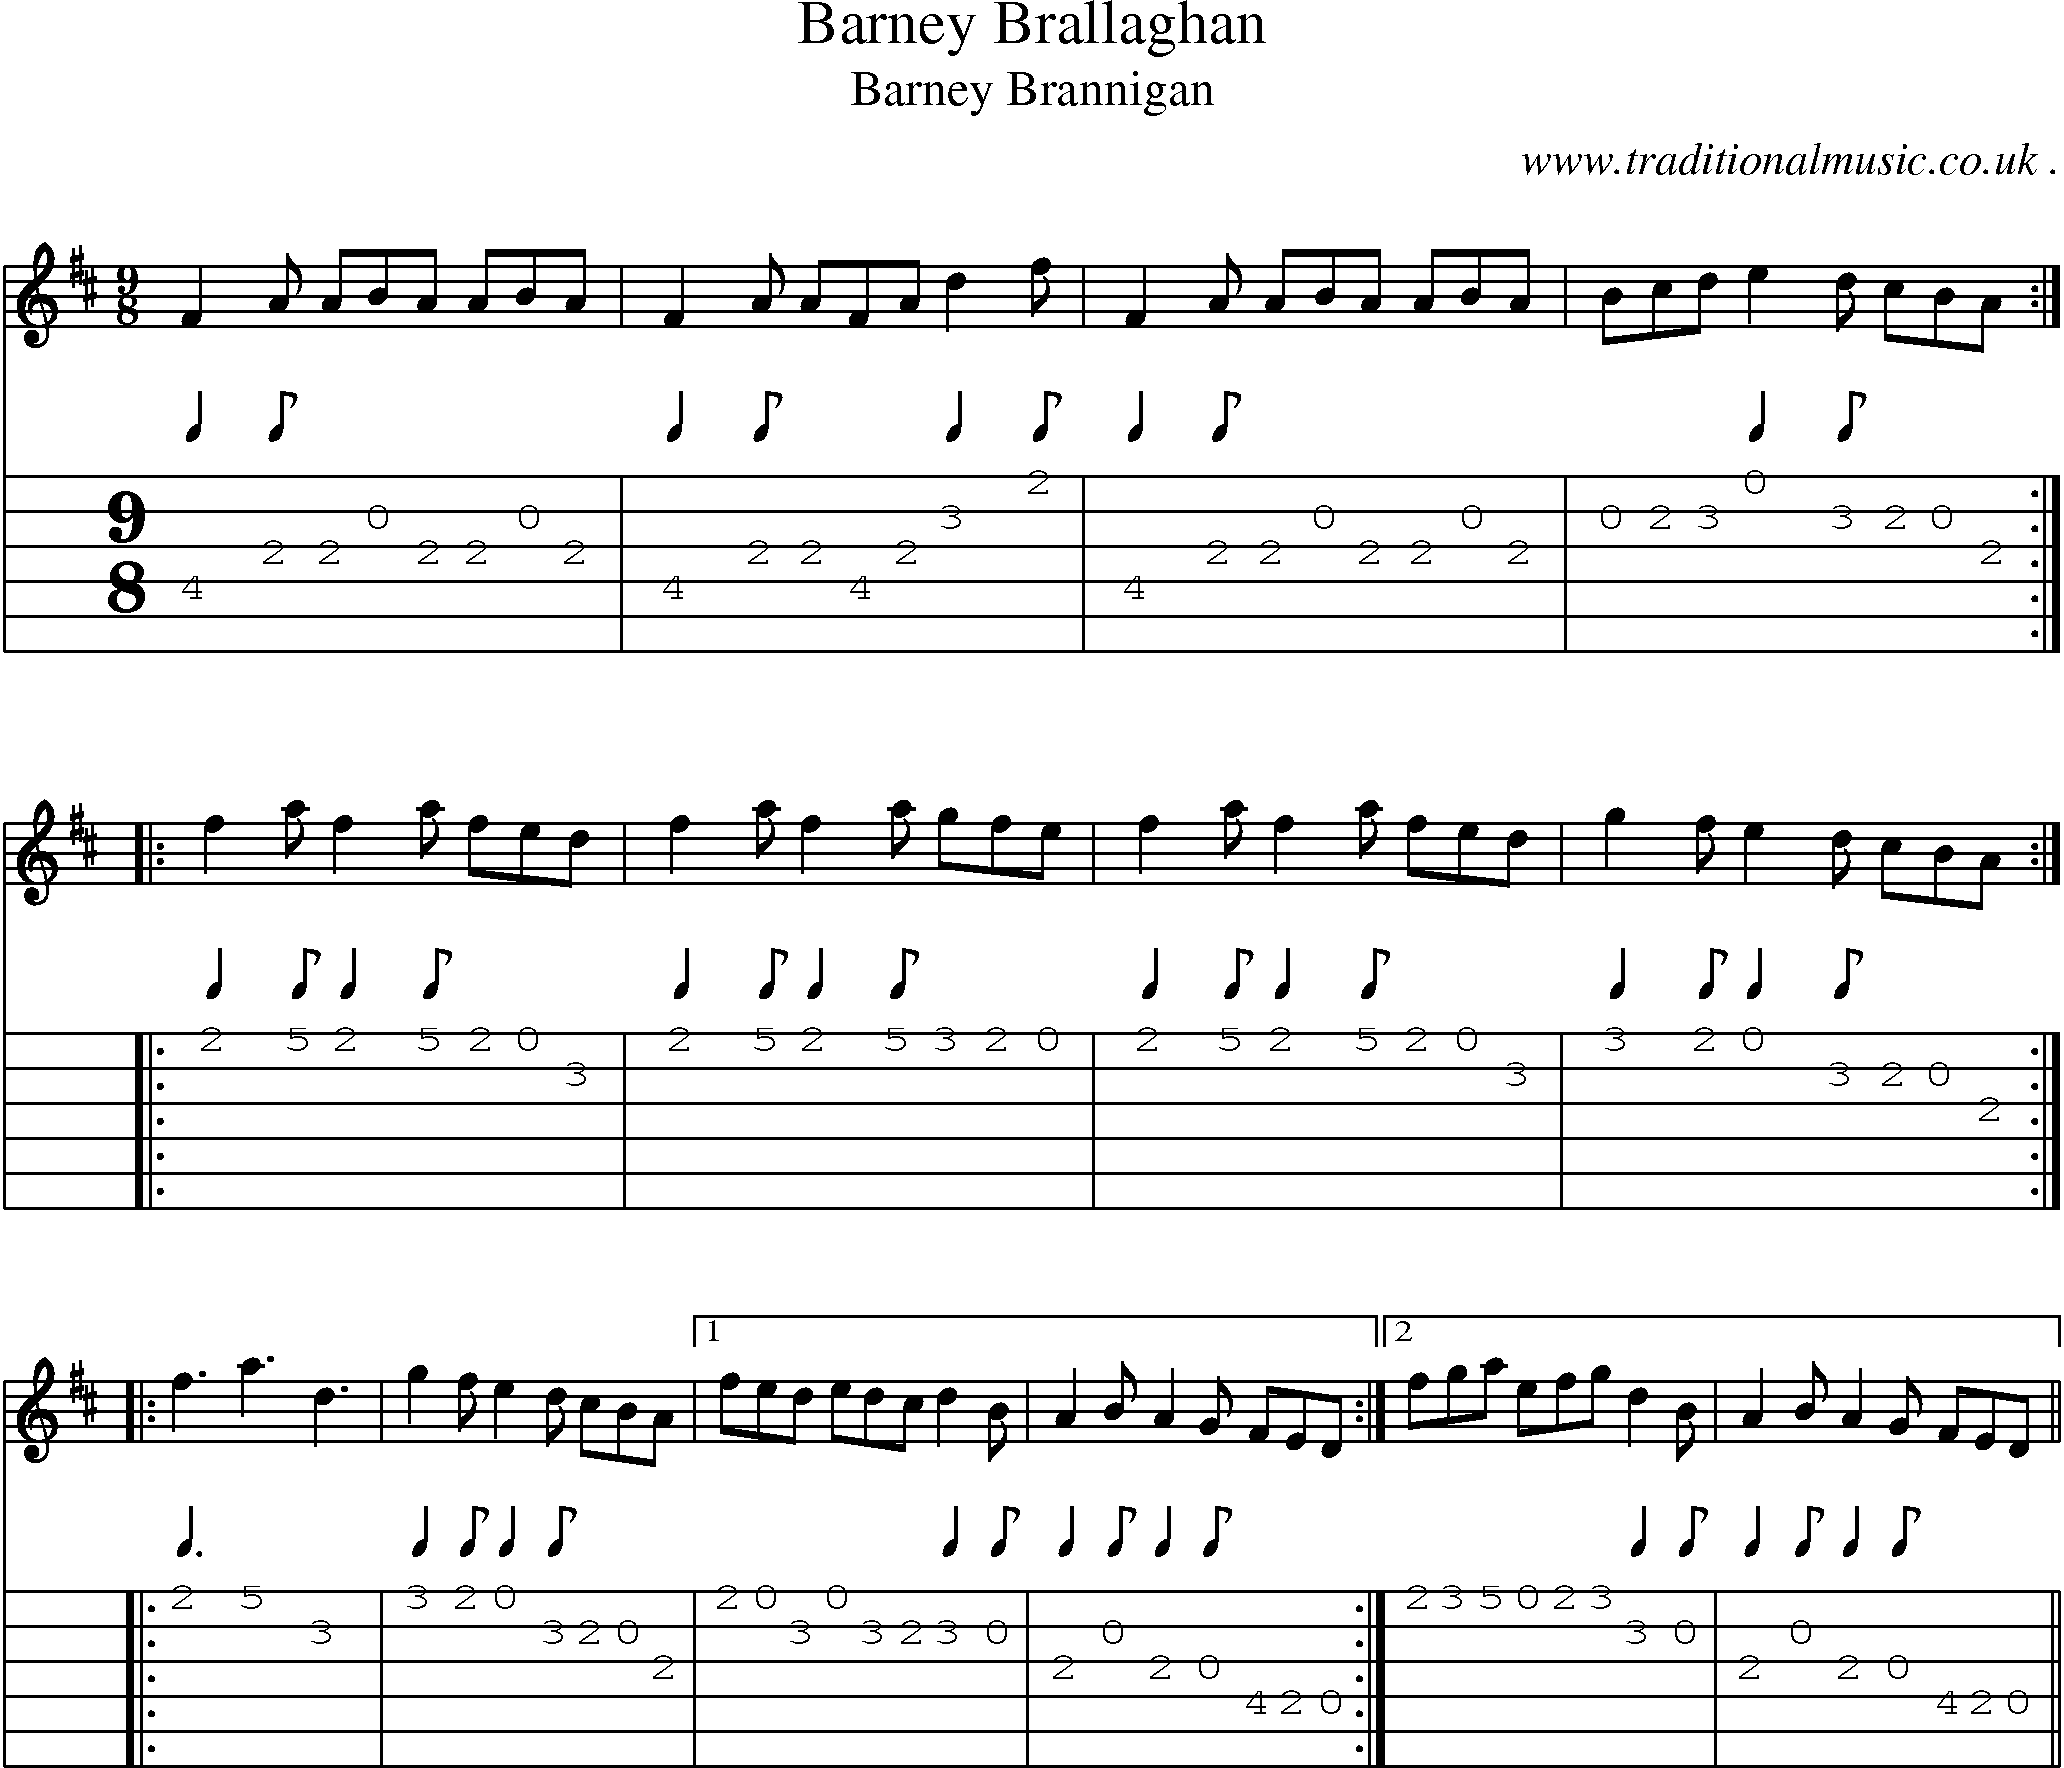 Sheet-Music and Guitar Tabs for Barney Brallaghan